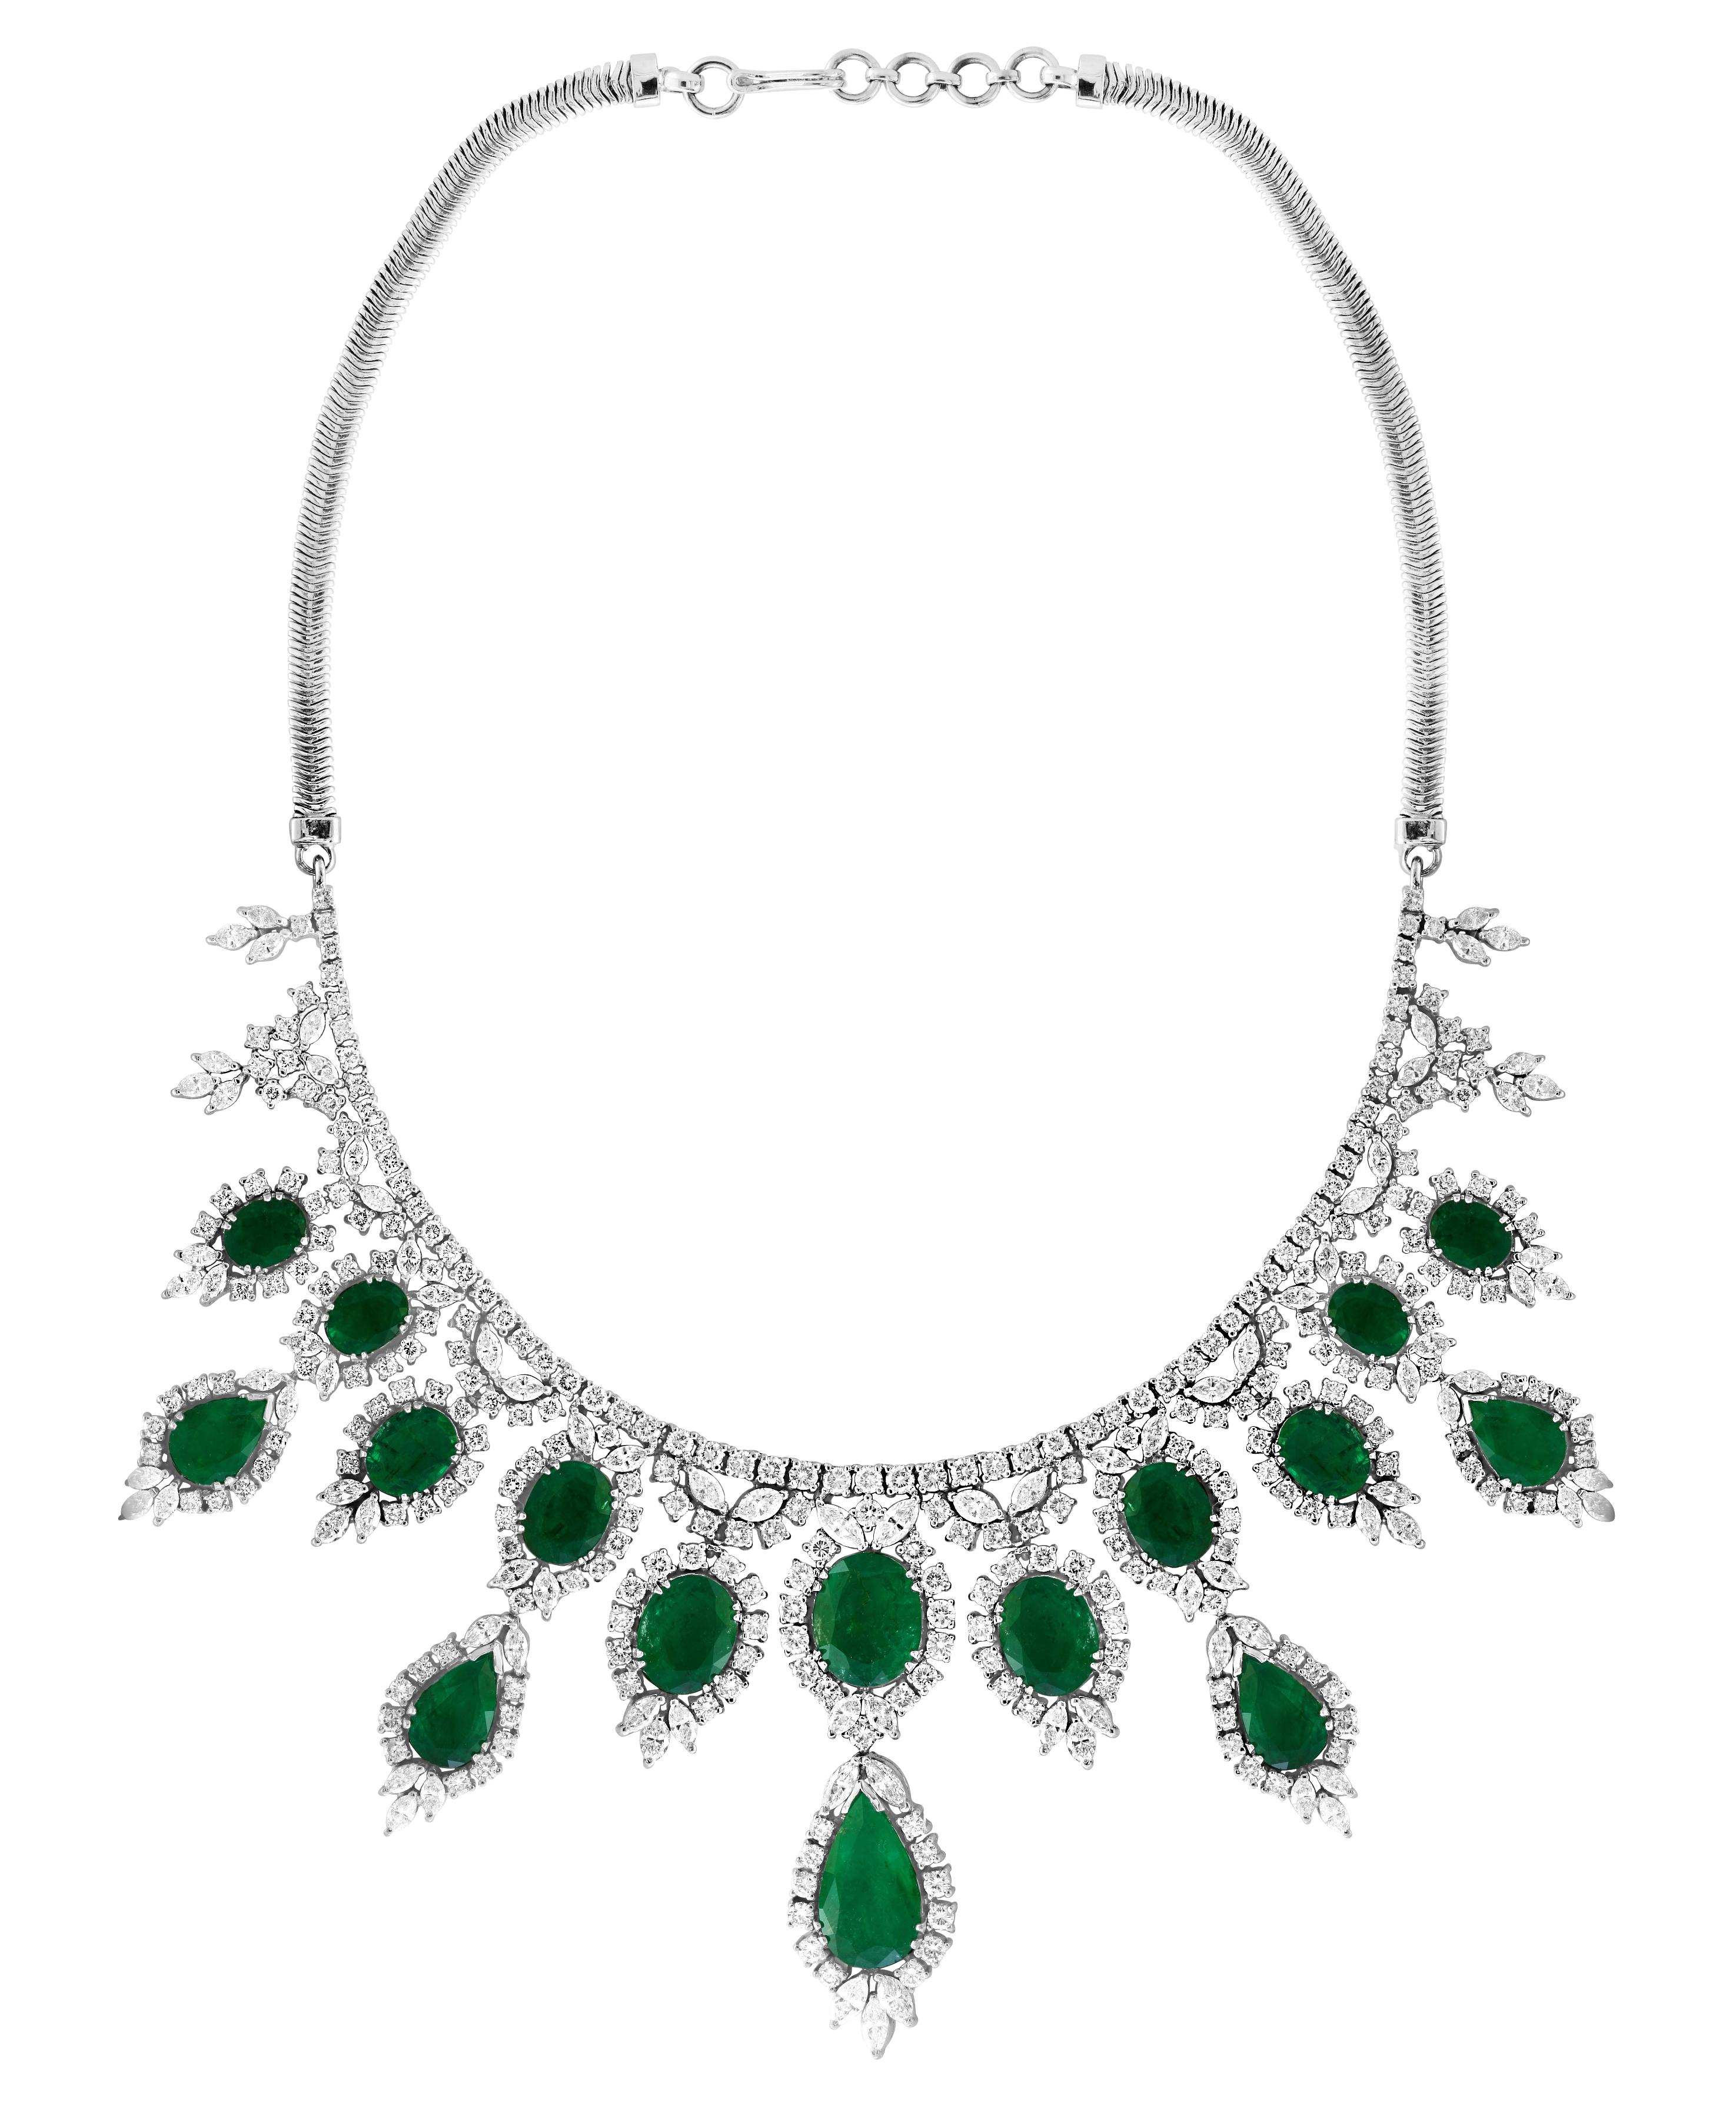 Pear Shape  Emerald And Diamond  Necklace And Earring  Bridal Suite Estate
This spectacular Bridal set  consisting of one large approximately  6.5 Carat Pear shape  Emerald  in the center  surrounded by brilliant cut diamonds .
A magnificent emerald